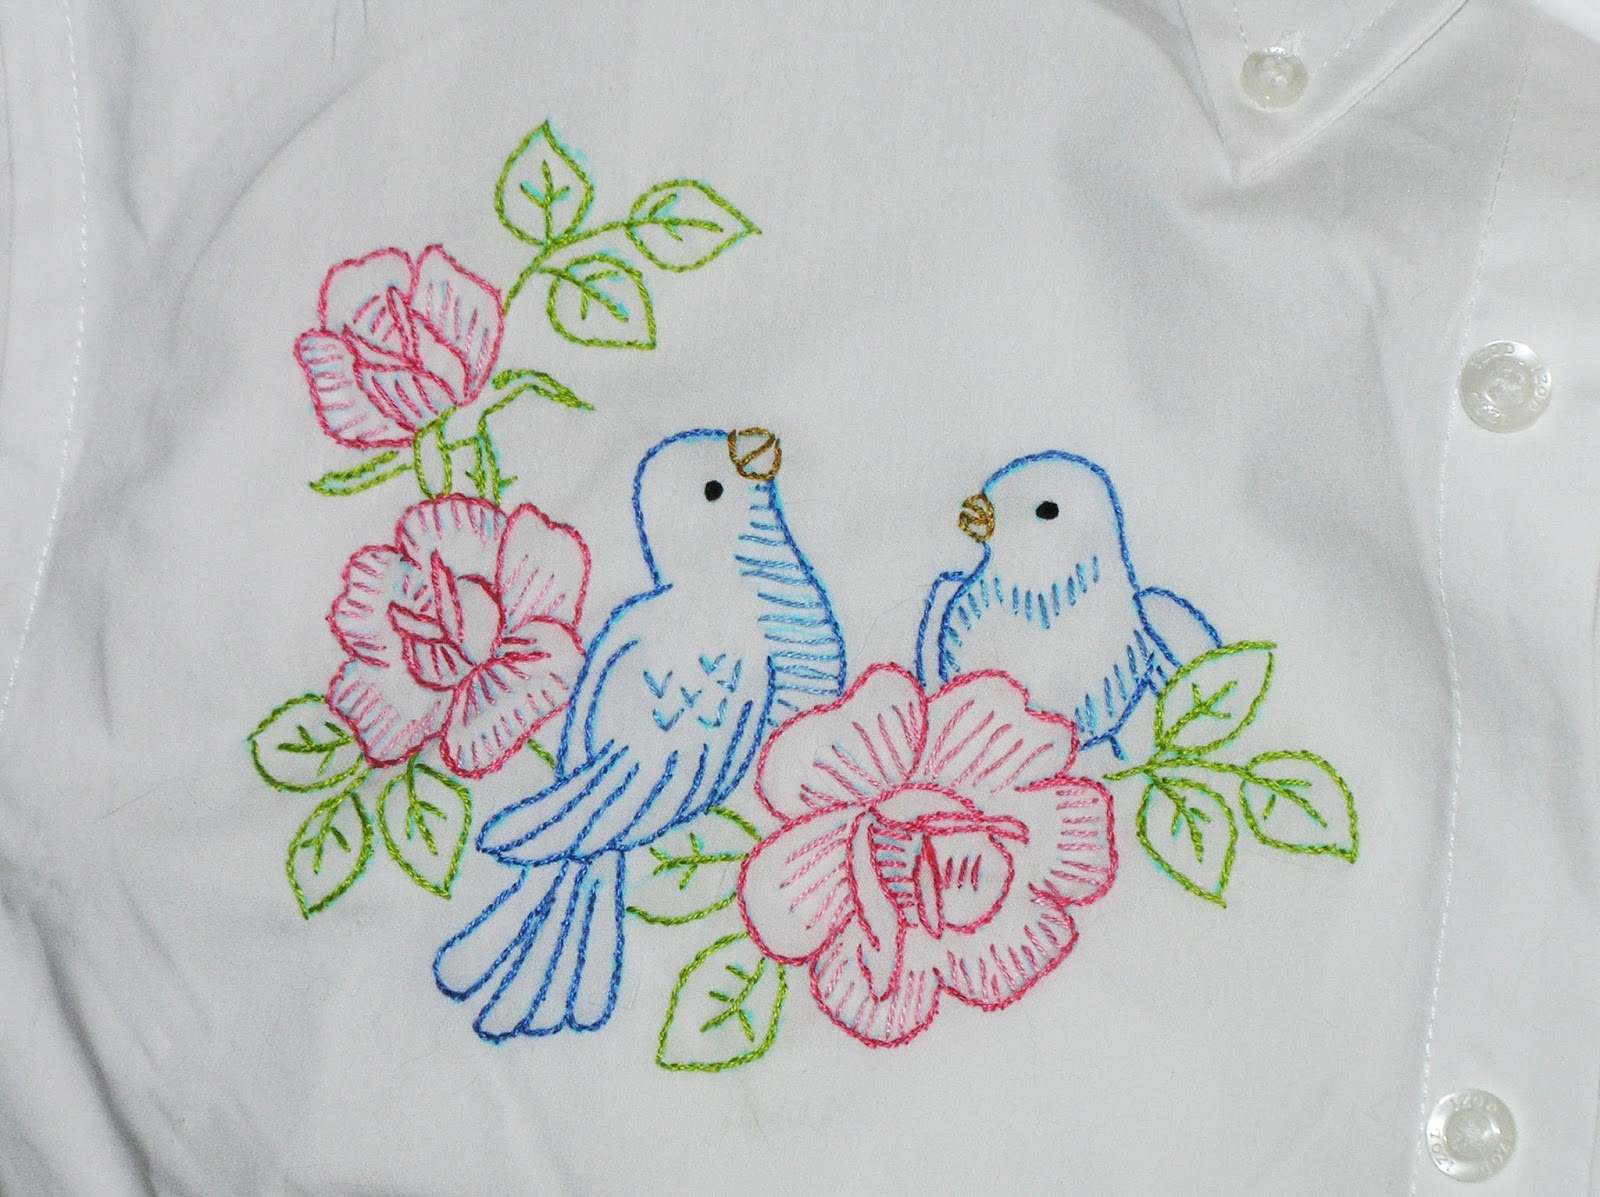 Kitty And Me Designs: Embroidered Dress Shirts